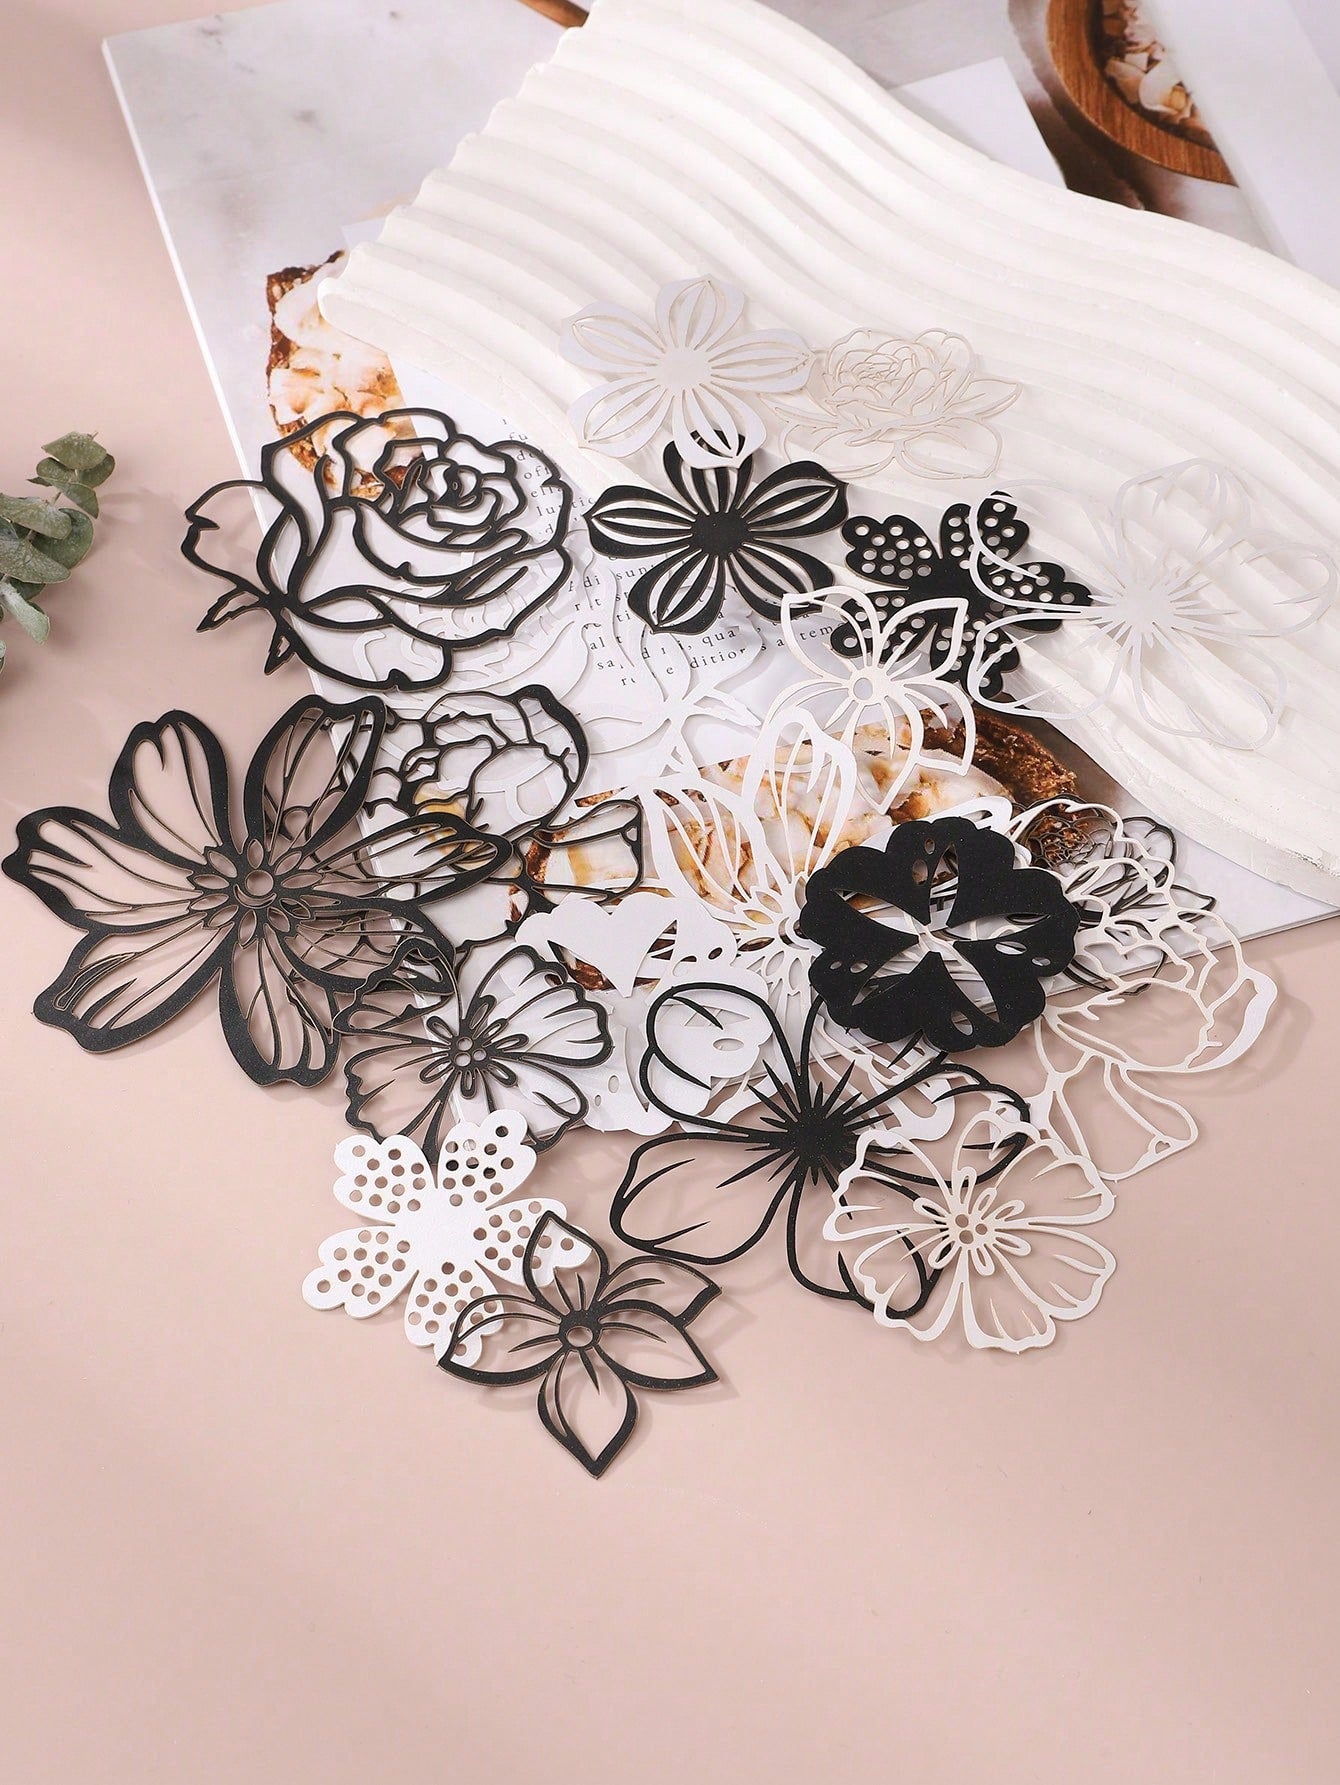 20pcs Flower Shaped Hollow Material Paper, Vintage Multi-purpose Decorative Craft Paper For DIY Craft, Decoration, Hand Account